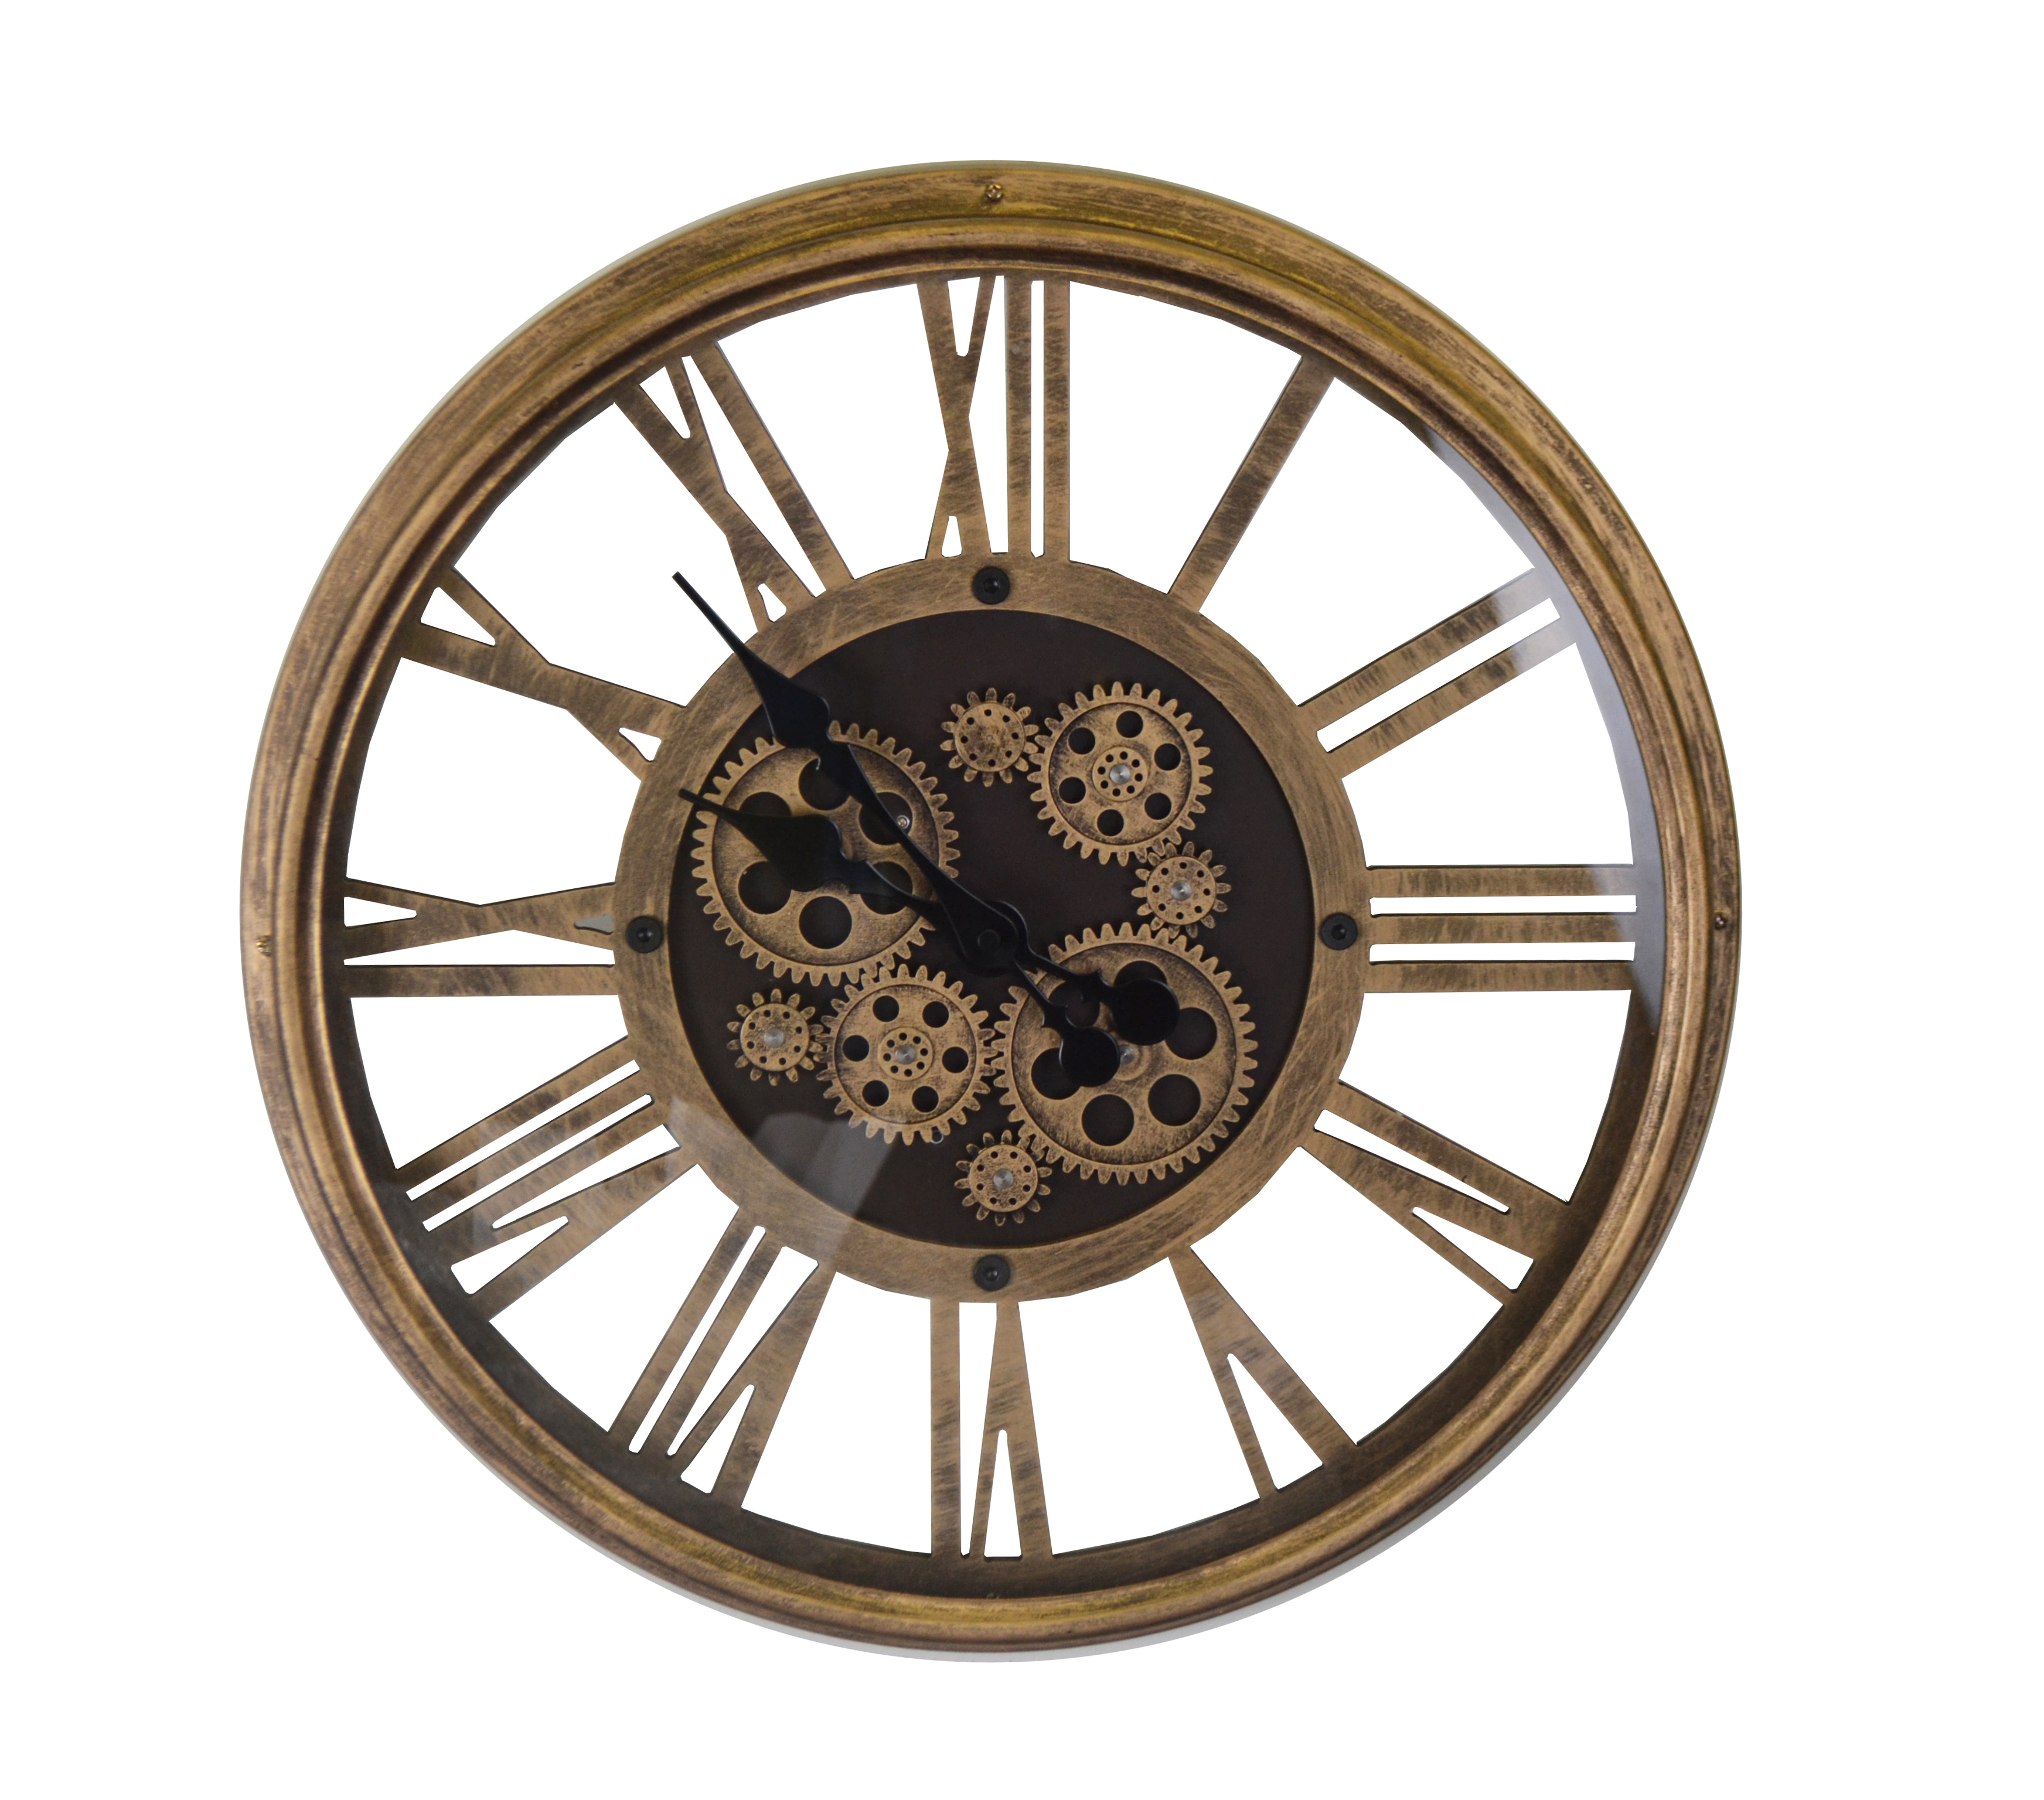 Moving Gears Antique Gold Steampunk Style Metal Wall Clock w/Roman Numerals